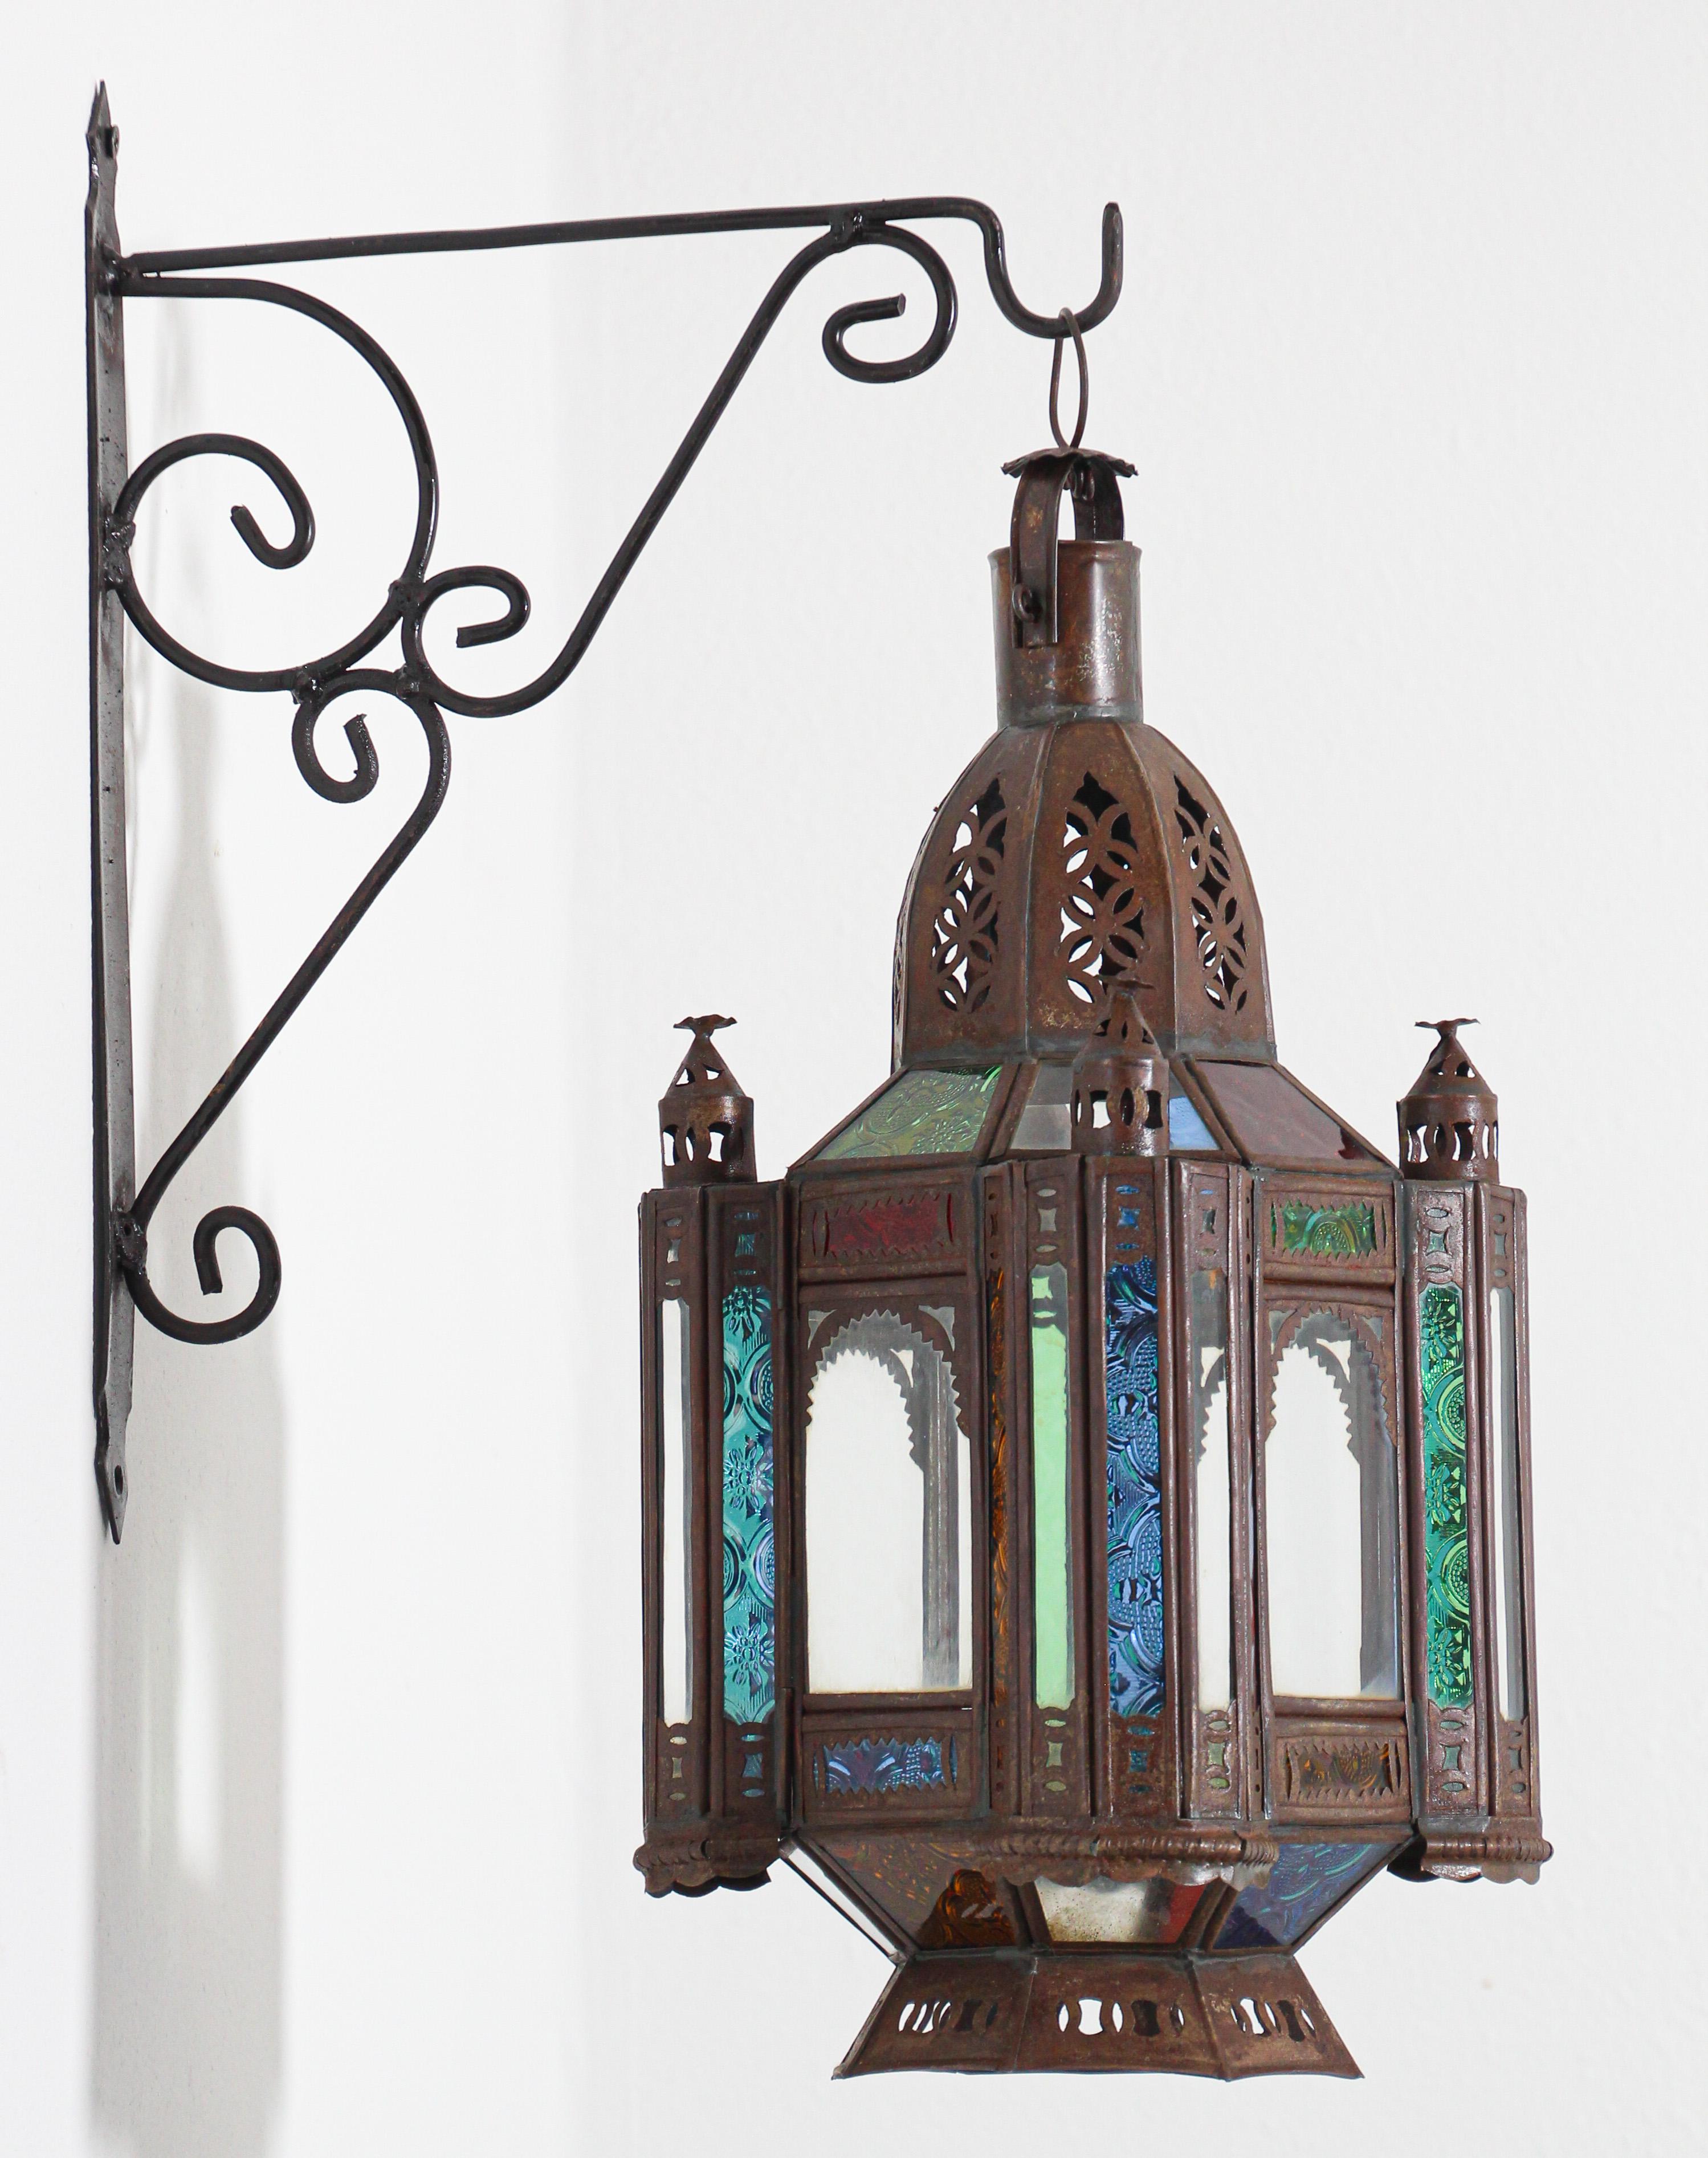 Vintage Moroccan Moorish metal and stained colored glass candle lantern
Handcrafted small Moroccan glass lantern or Moorish pendant.
Multi-color molded glass in green, lavender, blue and clear.
Hurricane candle lamp handmade in Marrakech, vintage